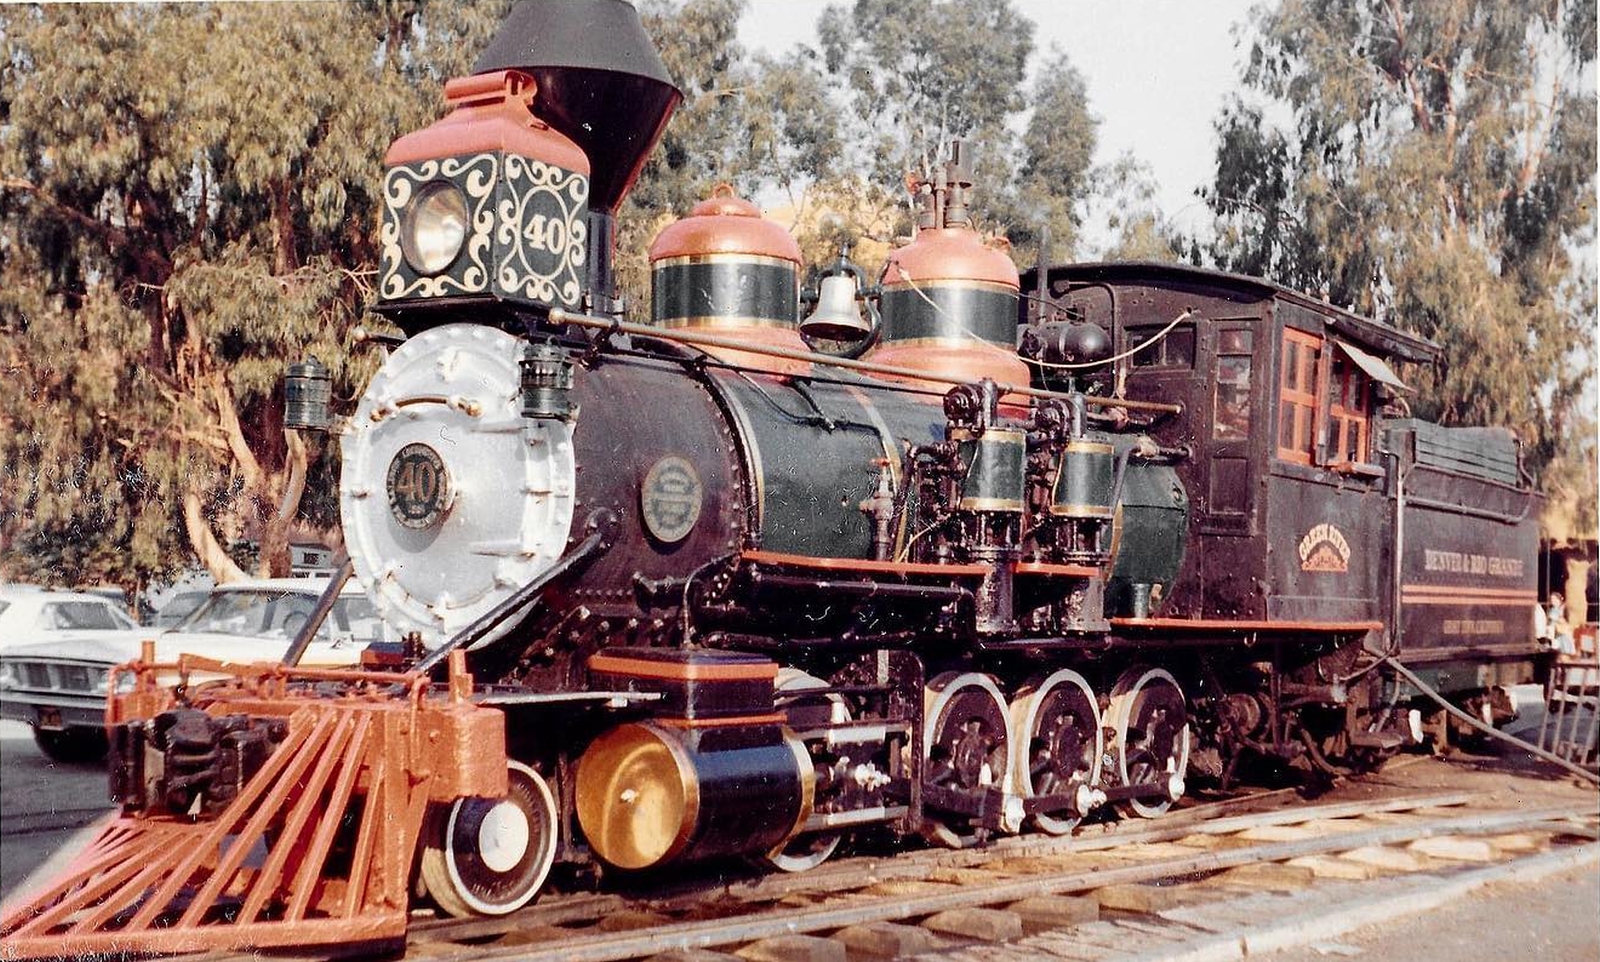 Former No. 400 “Green River” in 1965 as Ghost Town & Calico Railroad No. 40